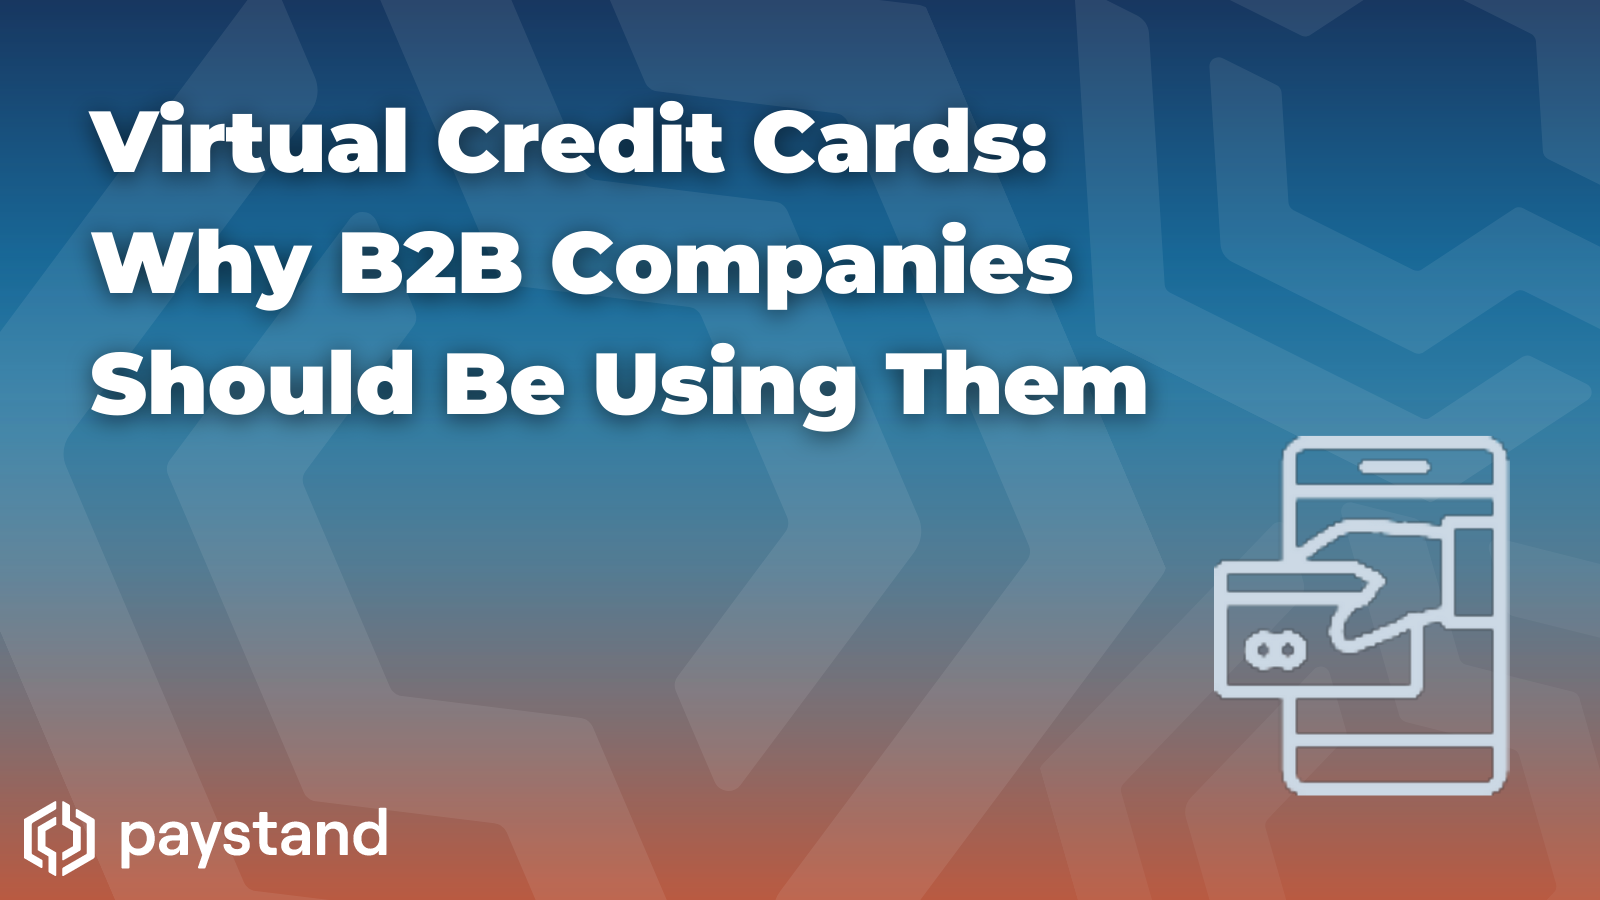 Virtual Credit Cards: Why B2B Companies Should Be Using Them